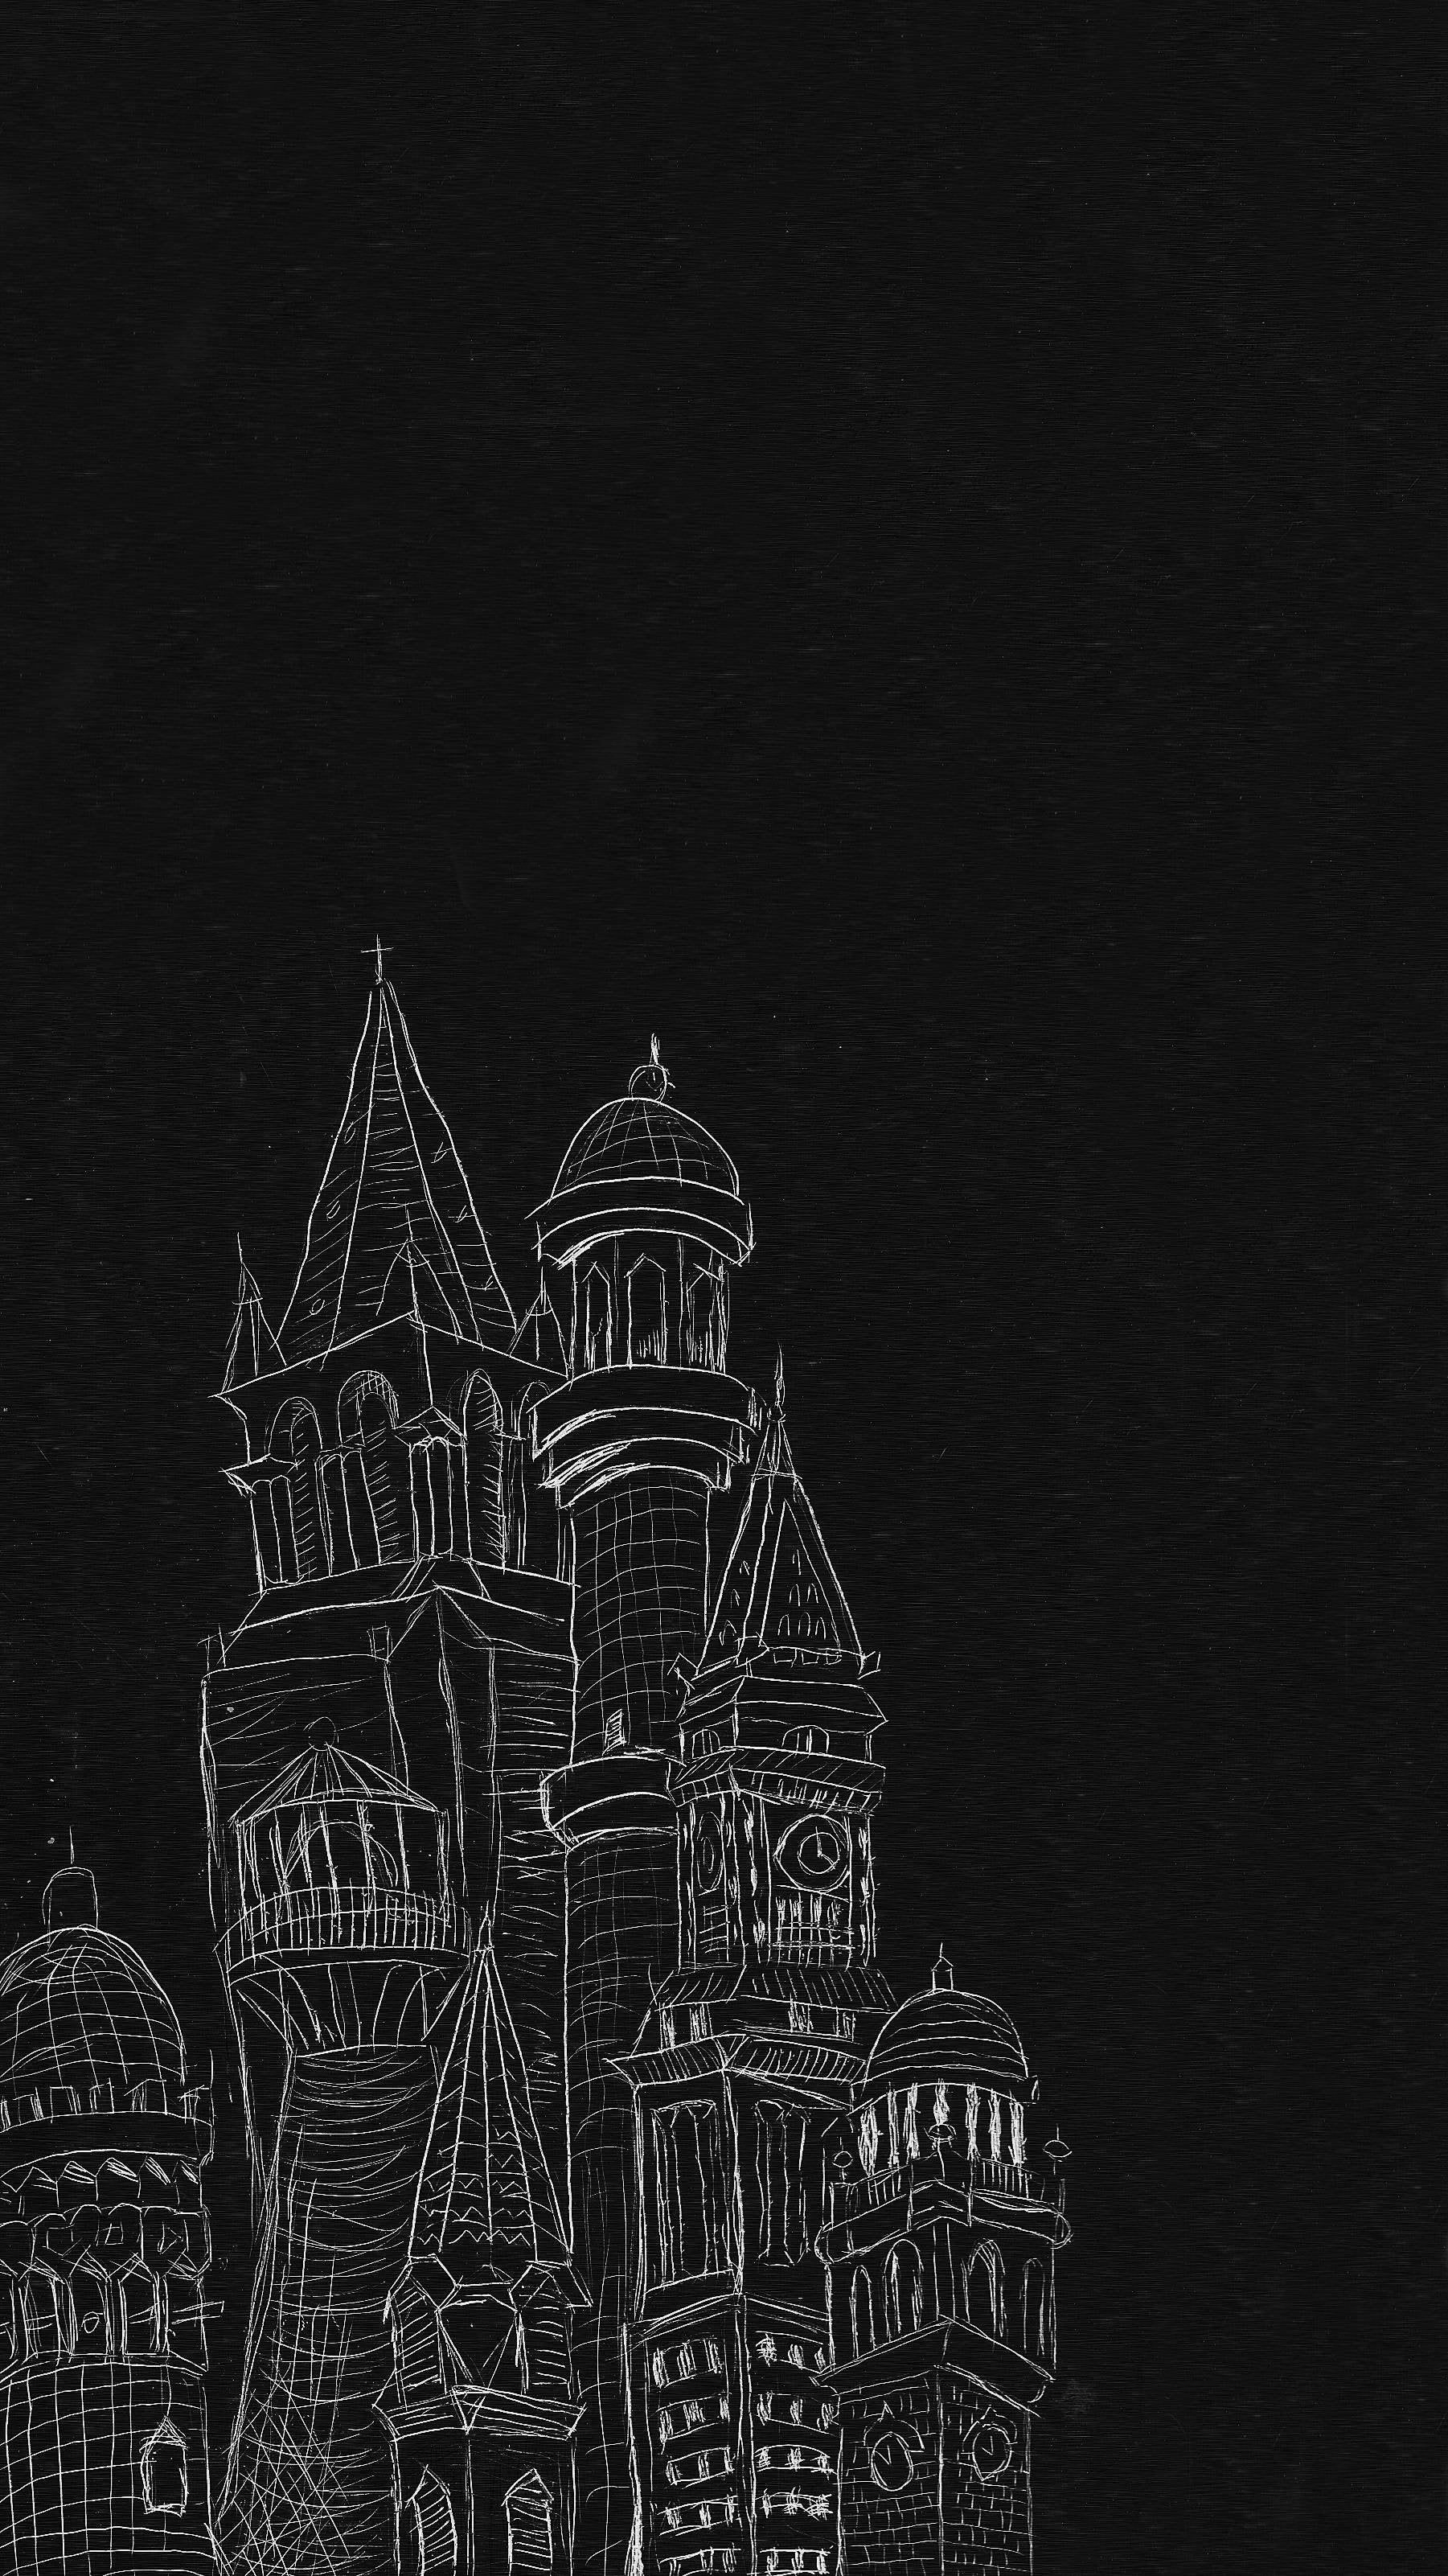 Towers an etching of some real and fake towers and made an iPhone 6 wallpaper out of it